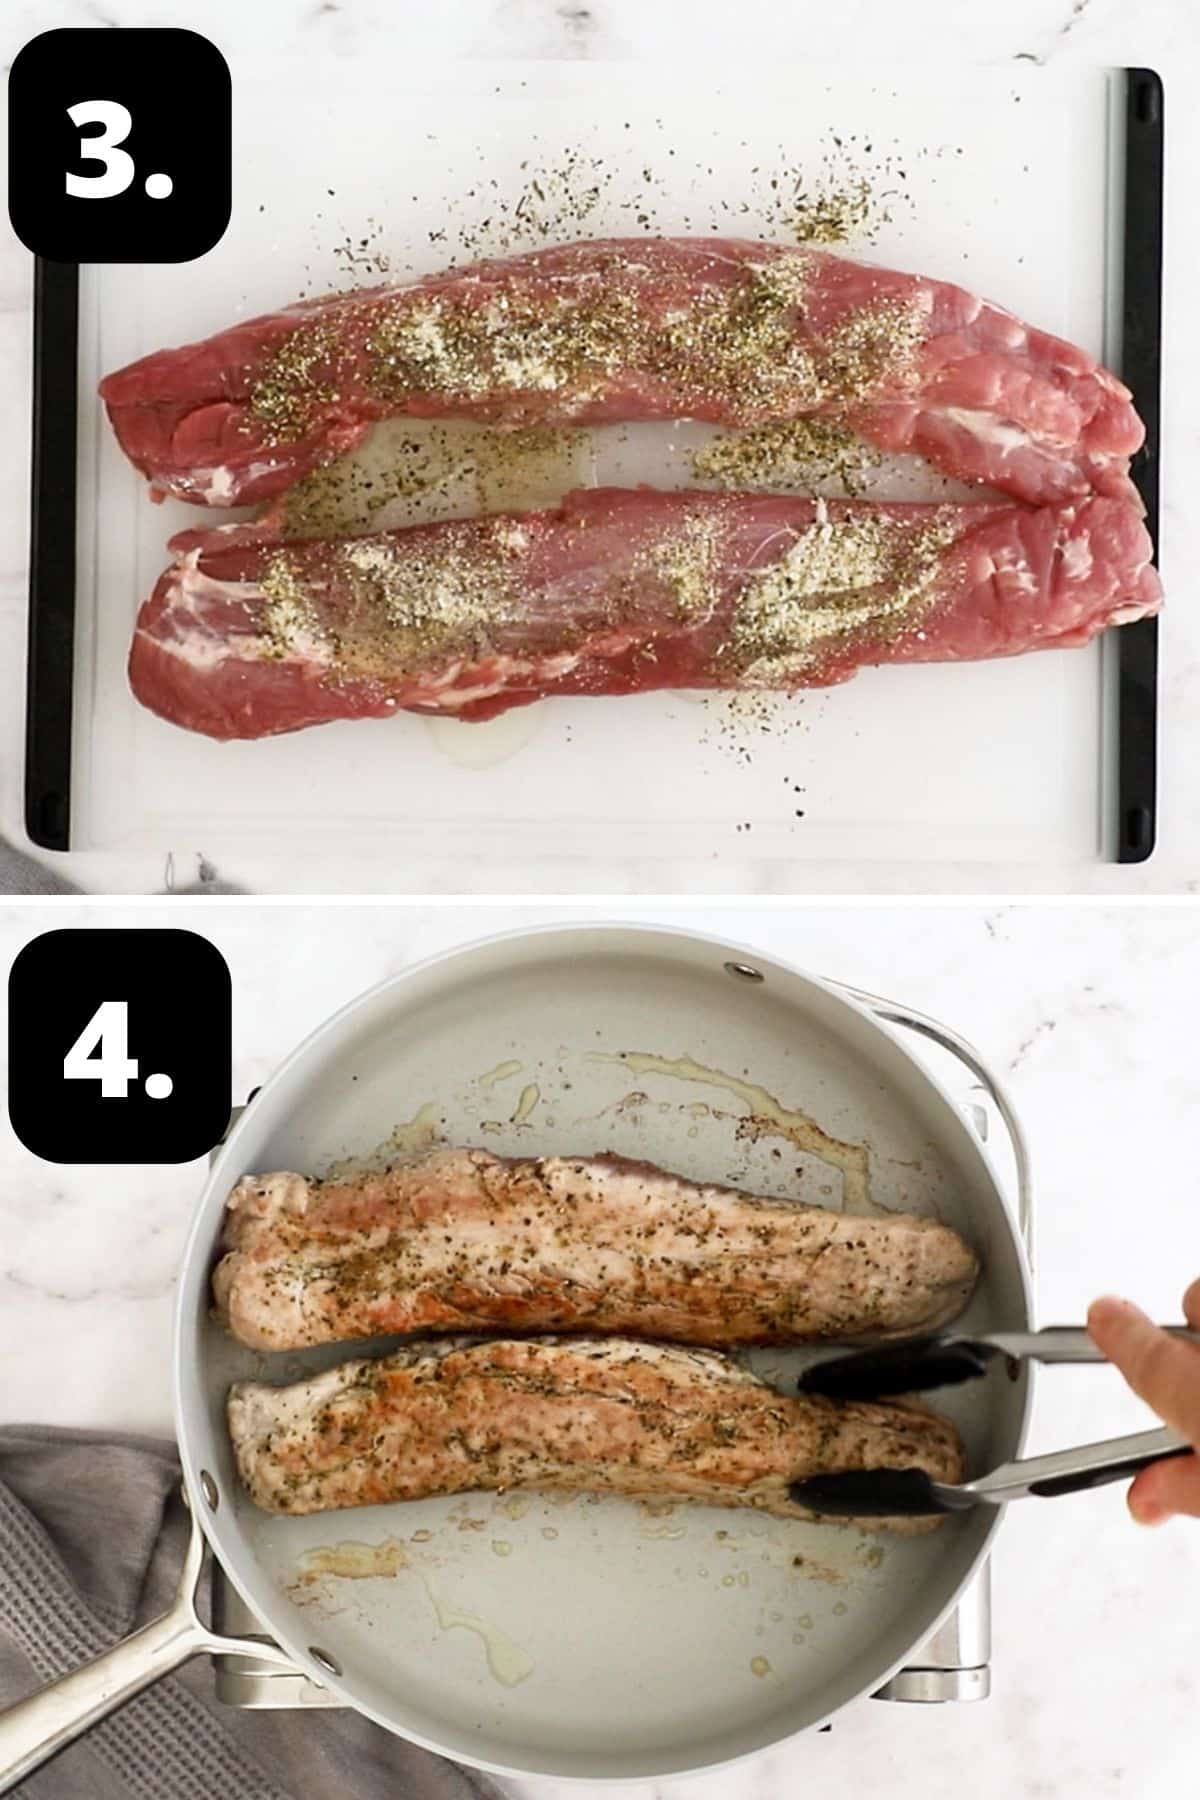 Steps 3-4 of preparing this recipe: seasoning the pork and then searing in a frying pan.